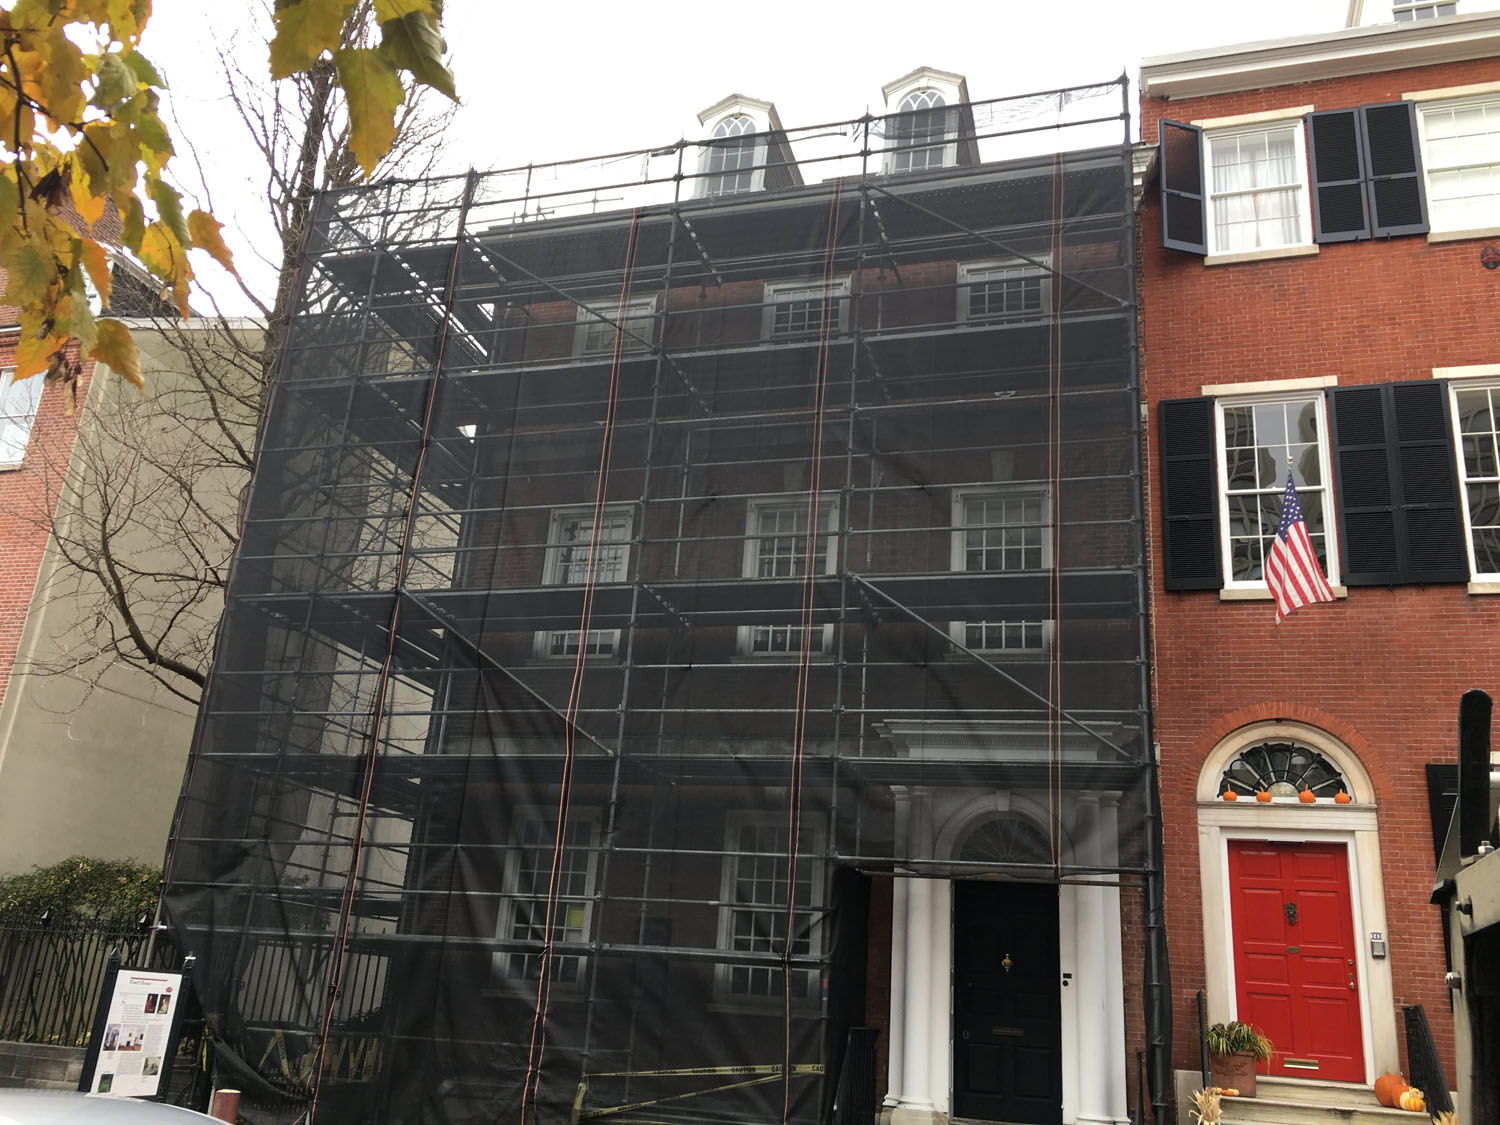 Scaffold, scaffolding, scaffolding, rent, rents, scaffolding rental, construction, ladders, equipment rental, scaffolding Philadelphia, scaffold PA, philly, building materials, NJ, DE, MD, NY, renting, leasing, inspection, general contractor, masonry, 215 743-2200, superior scaffold, electrical, HVAC, swing stage, swings, suspended scaffold, overhead protection, canopy, transport platform, lift, hoist, mast climber, access, buck hoist, powel house, historic